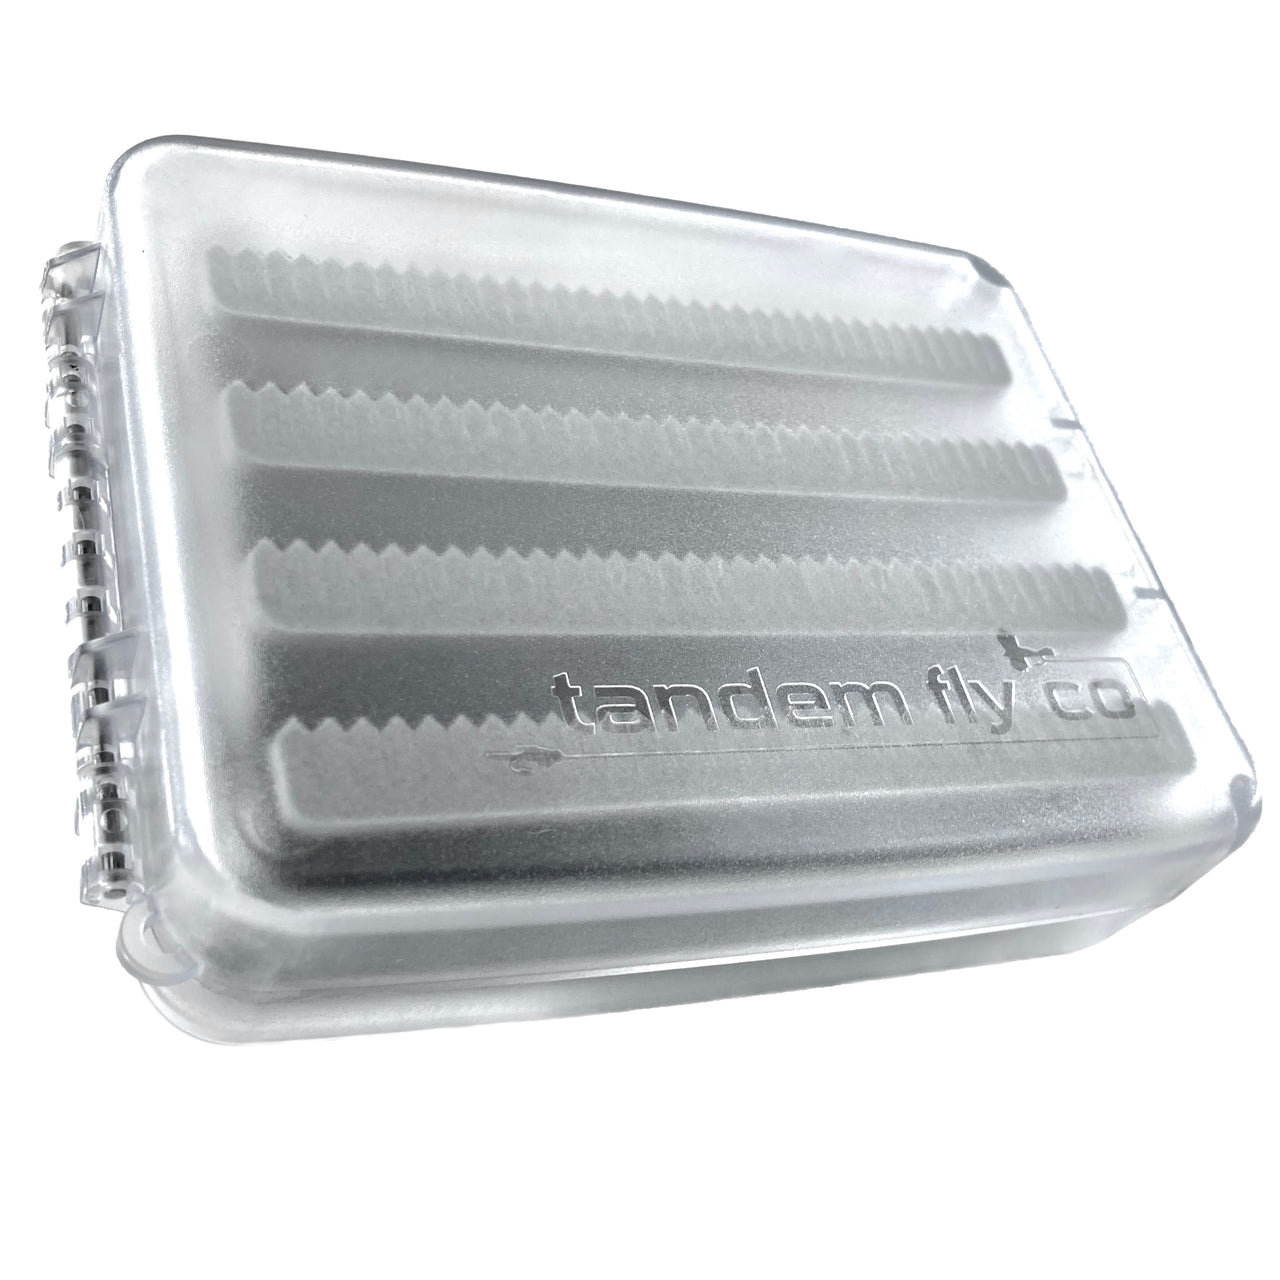 Tandem Fly Company Dropper Rig Fly Box – Tactical Fly Fisher